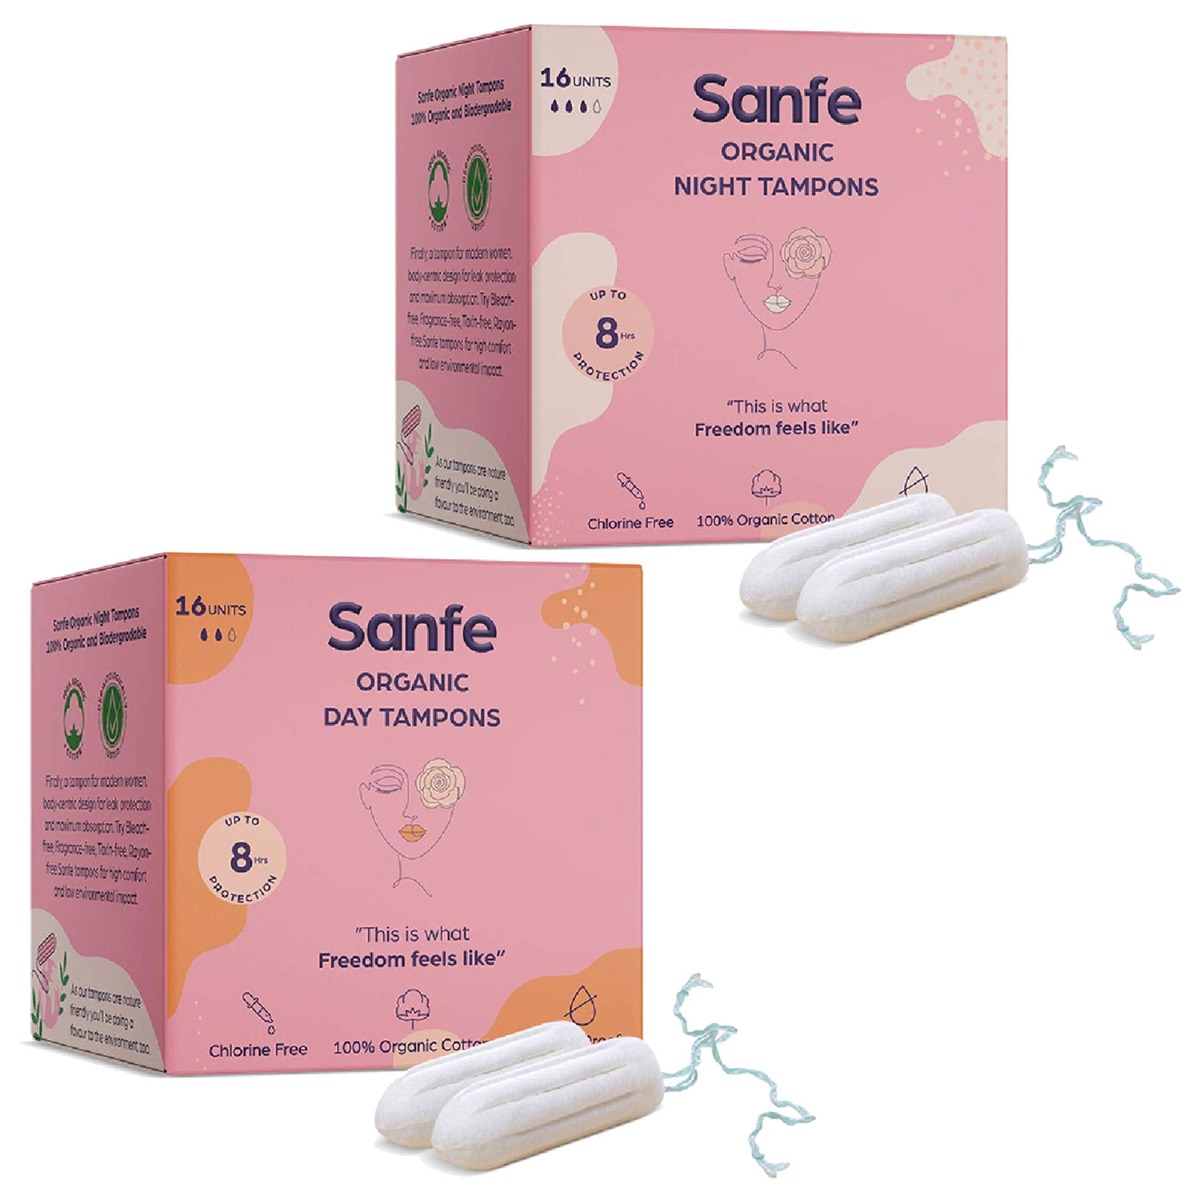 Sanfe Digital Tampons Day/Night, Pack Of 16 Each